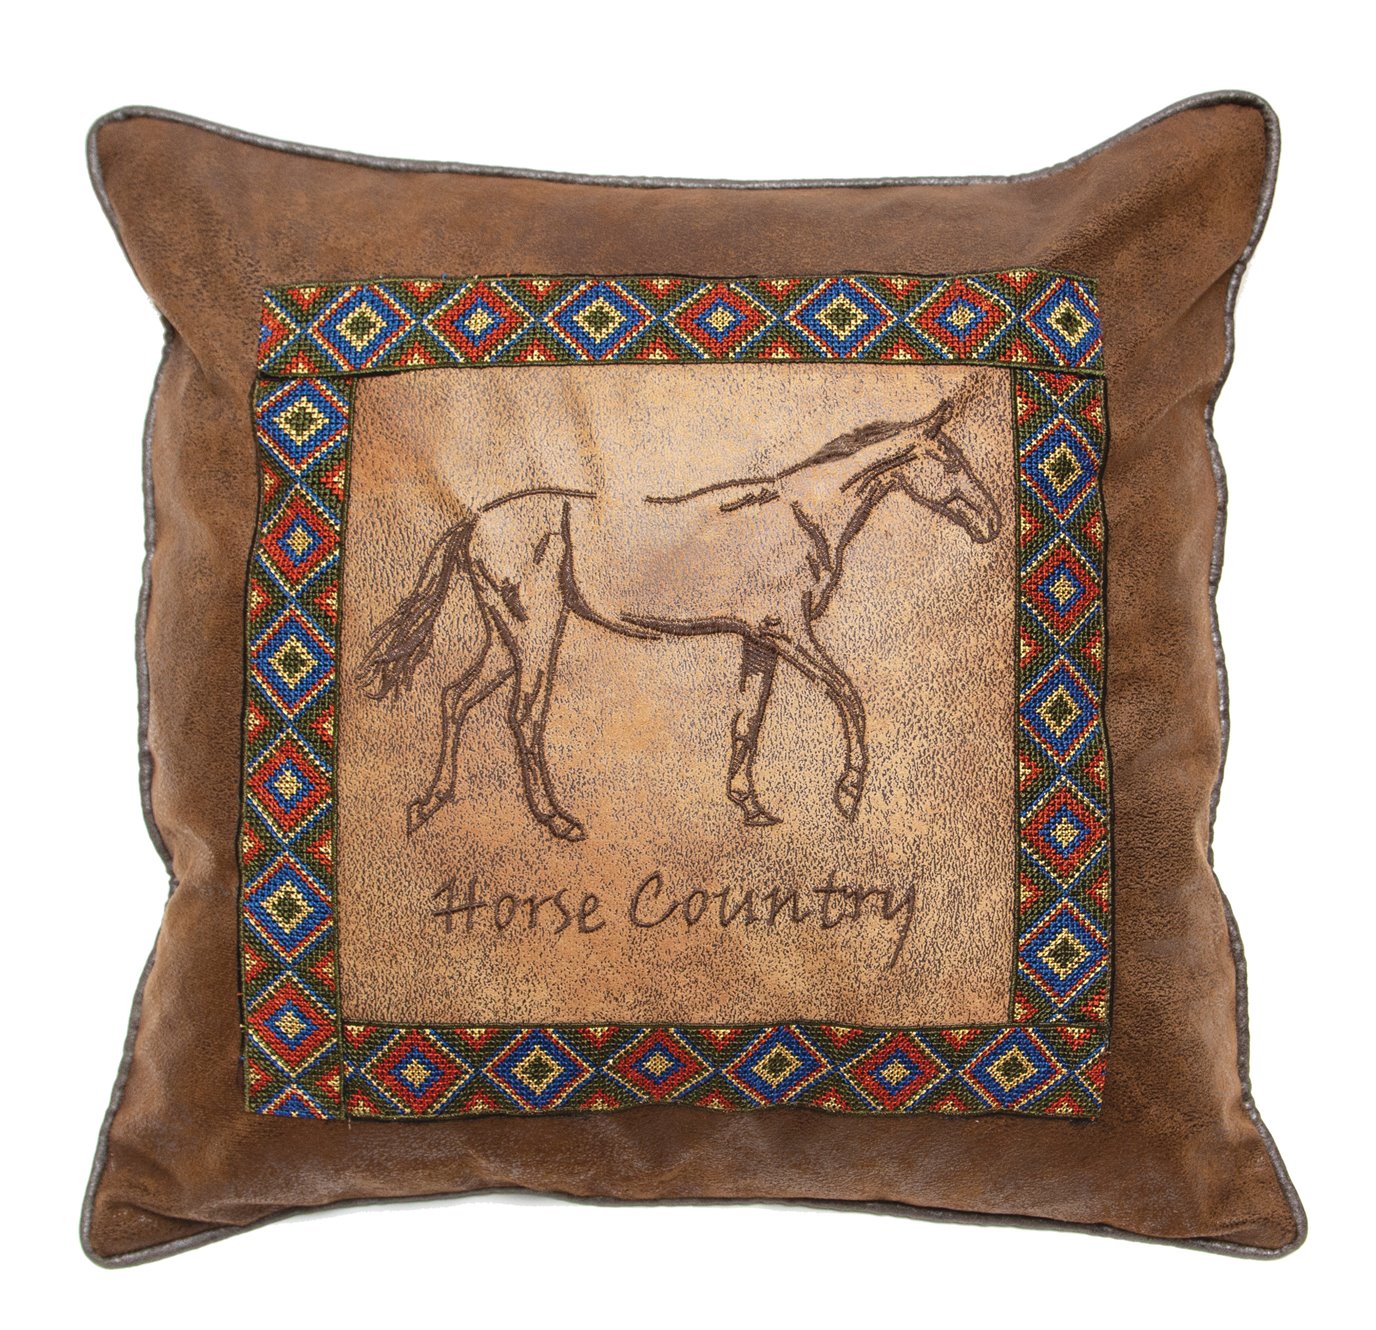 Horse Country Pillow 18"x18"